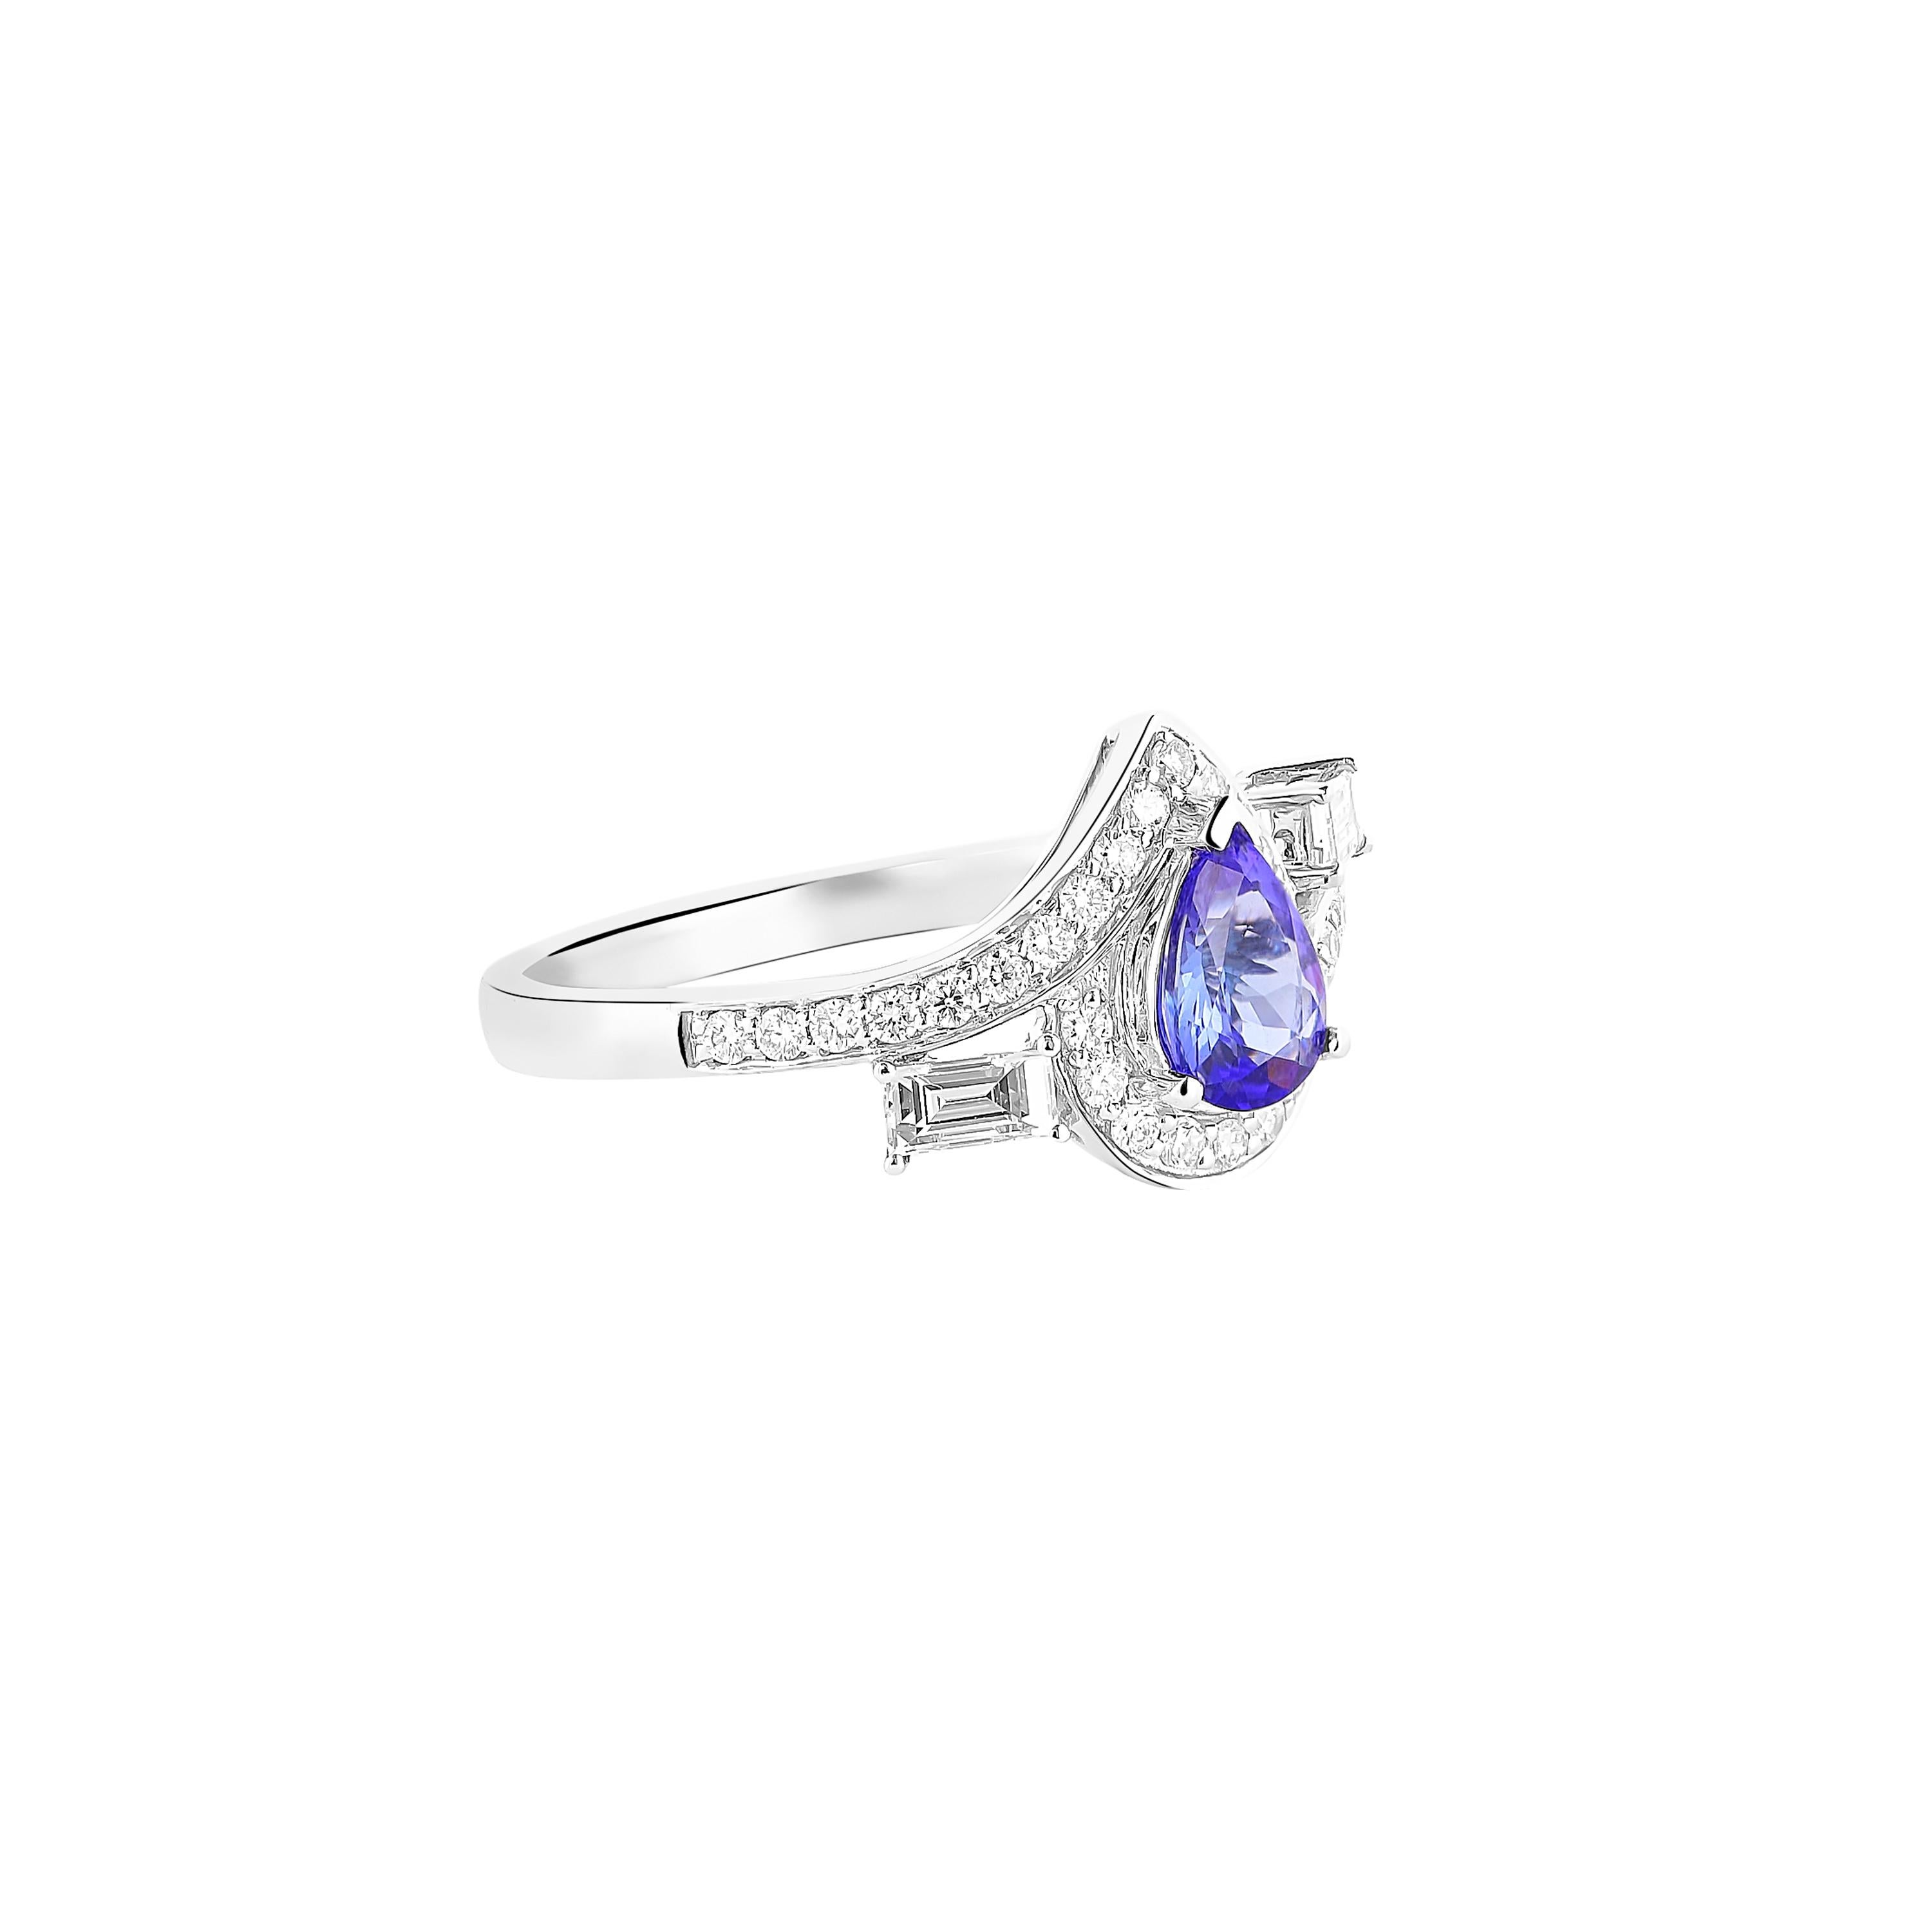 This collection features a selection of the most tantalizing Tanzanites. This enchanting East African gemstone can only be procured from one mine in the foothills of Mount Kilimanjaro, Tanzania. We have accented the rich purple-blue hues of this